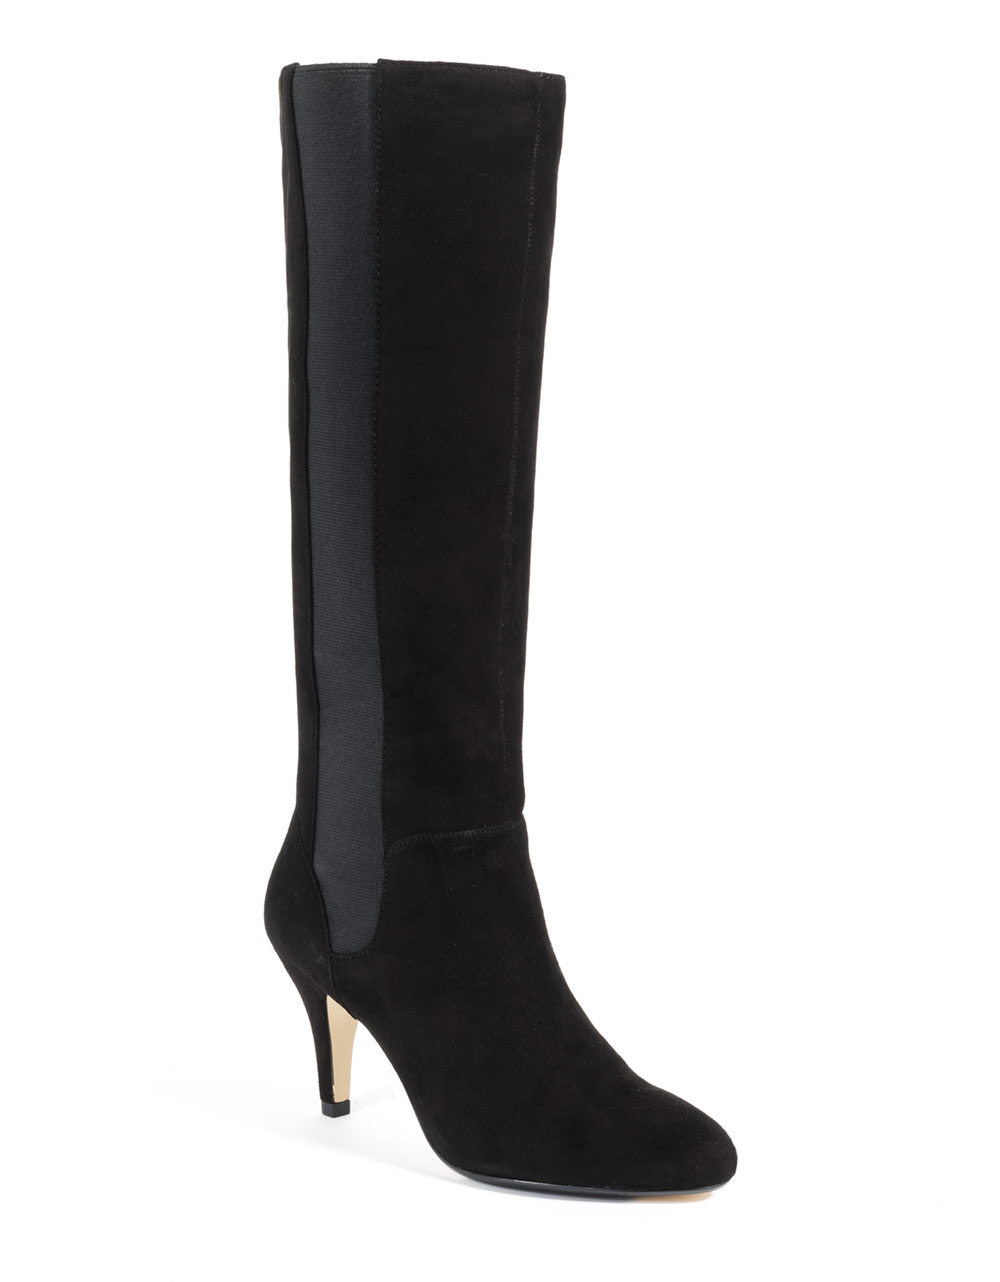 Adrienne Vittadini Theresa Suede Boots in Black (black suede) | Lyst